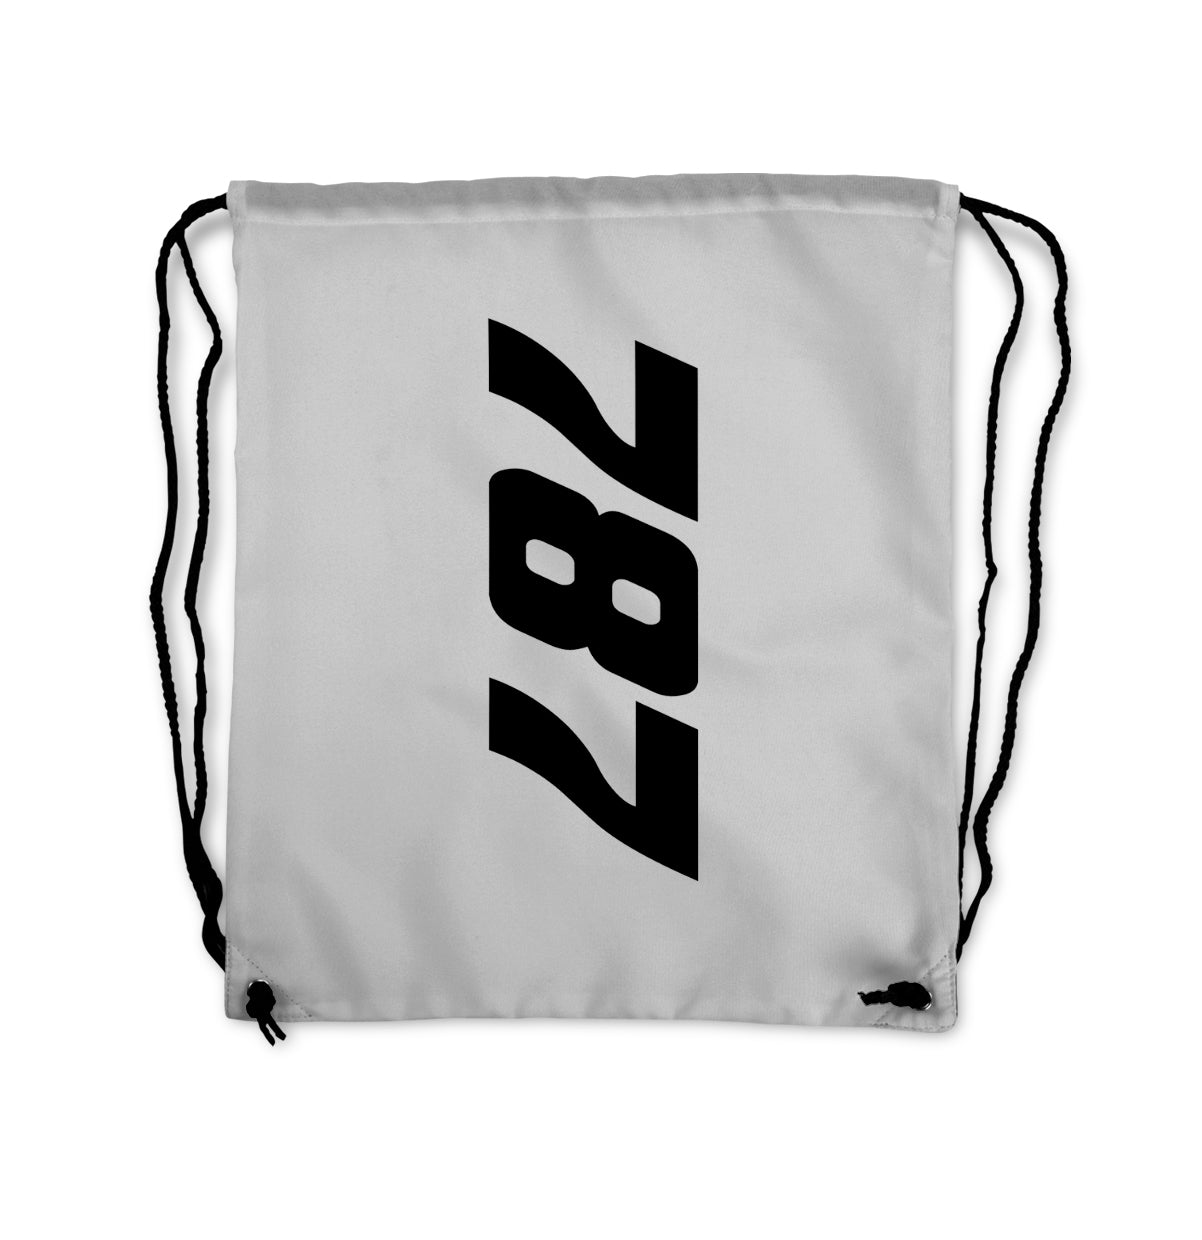 Boeing 787 Text Designed Drawstring Bags